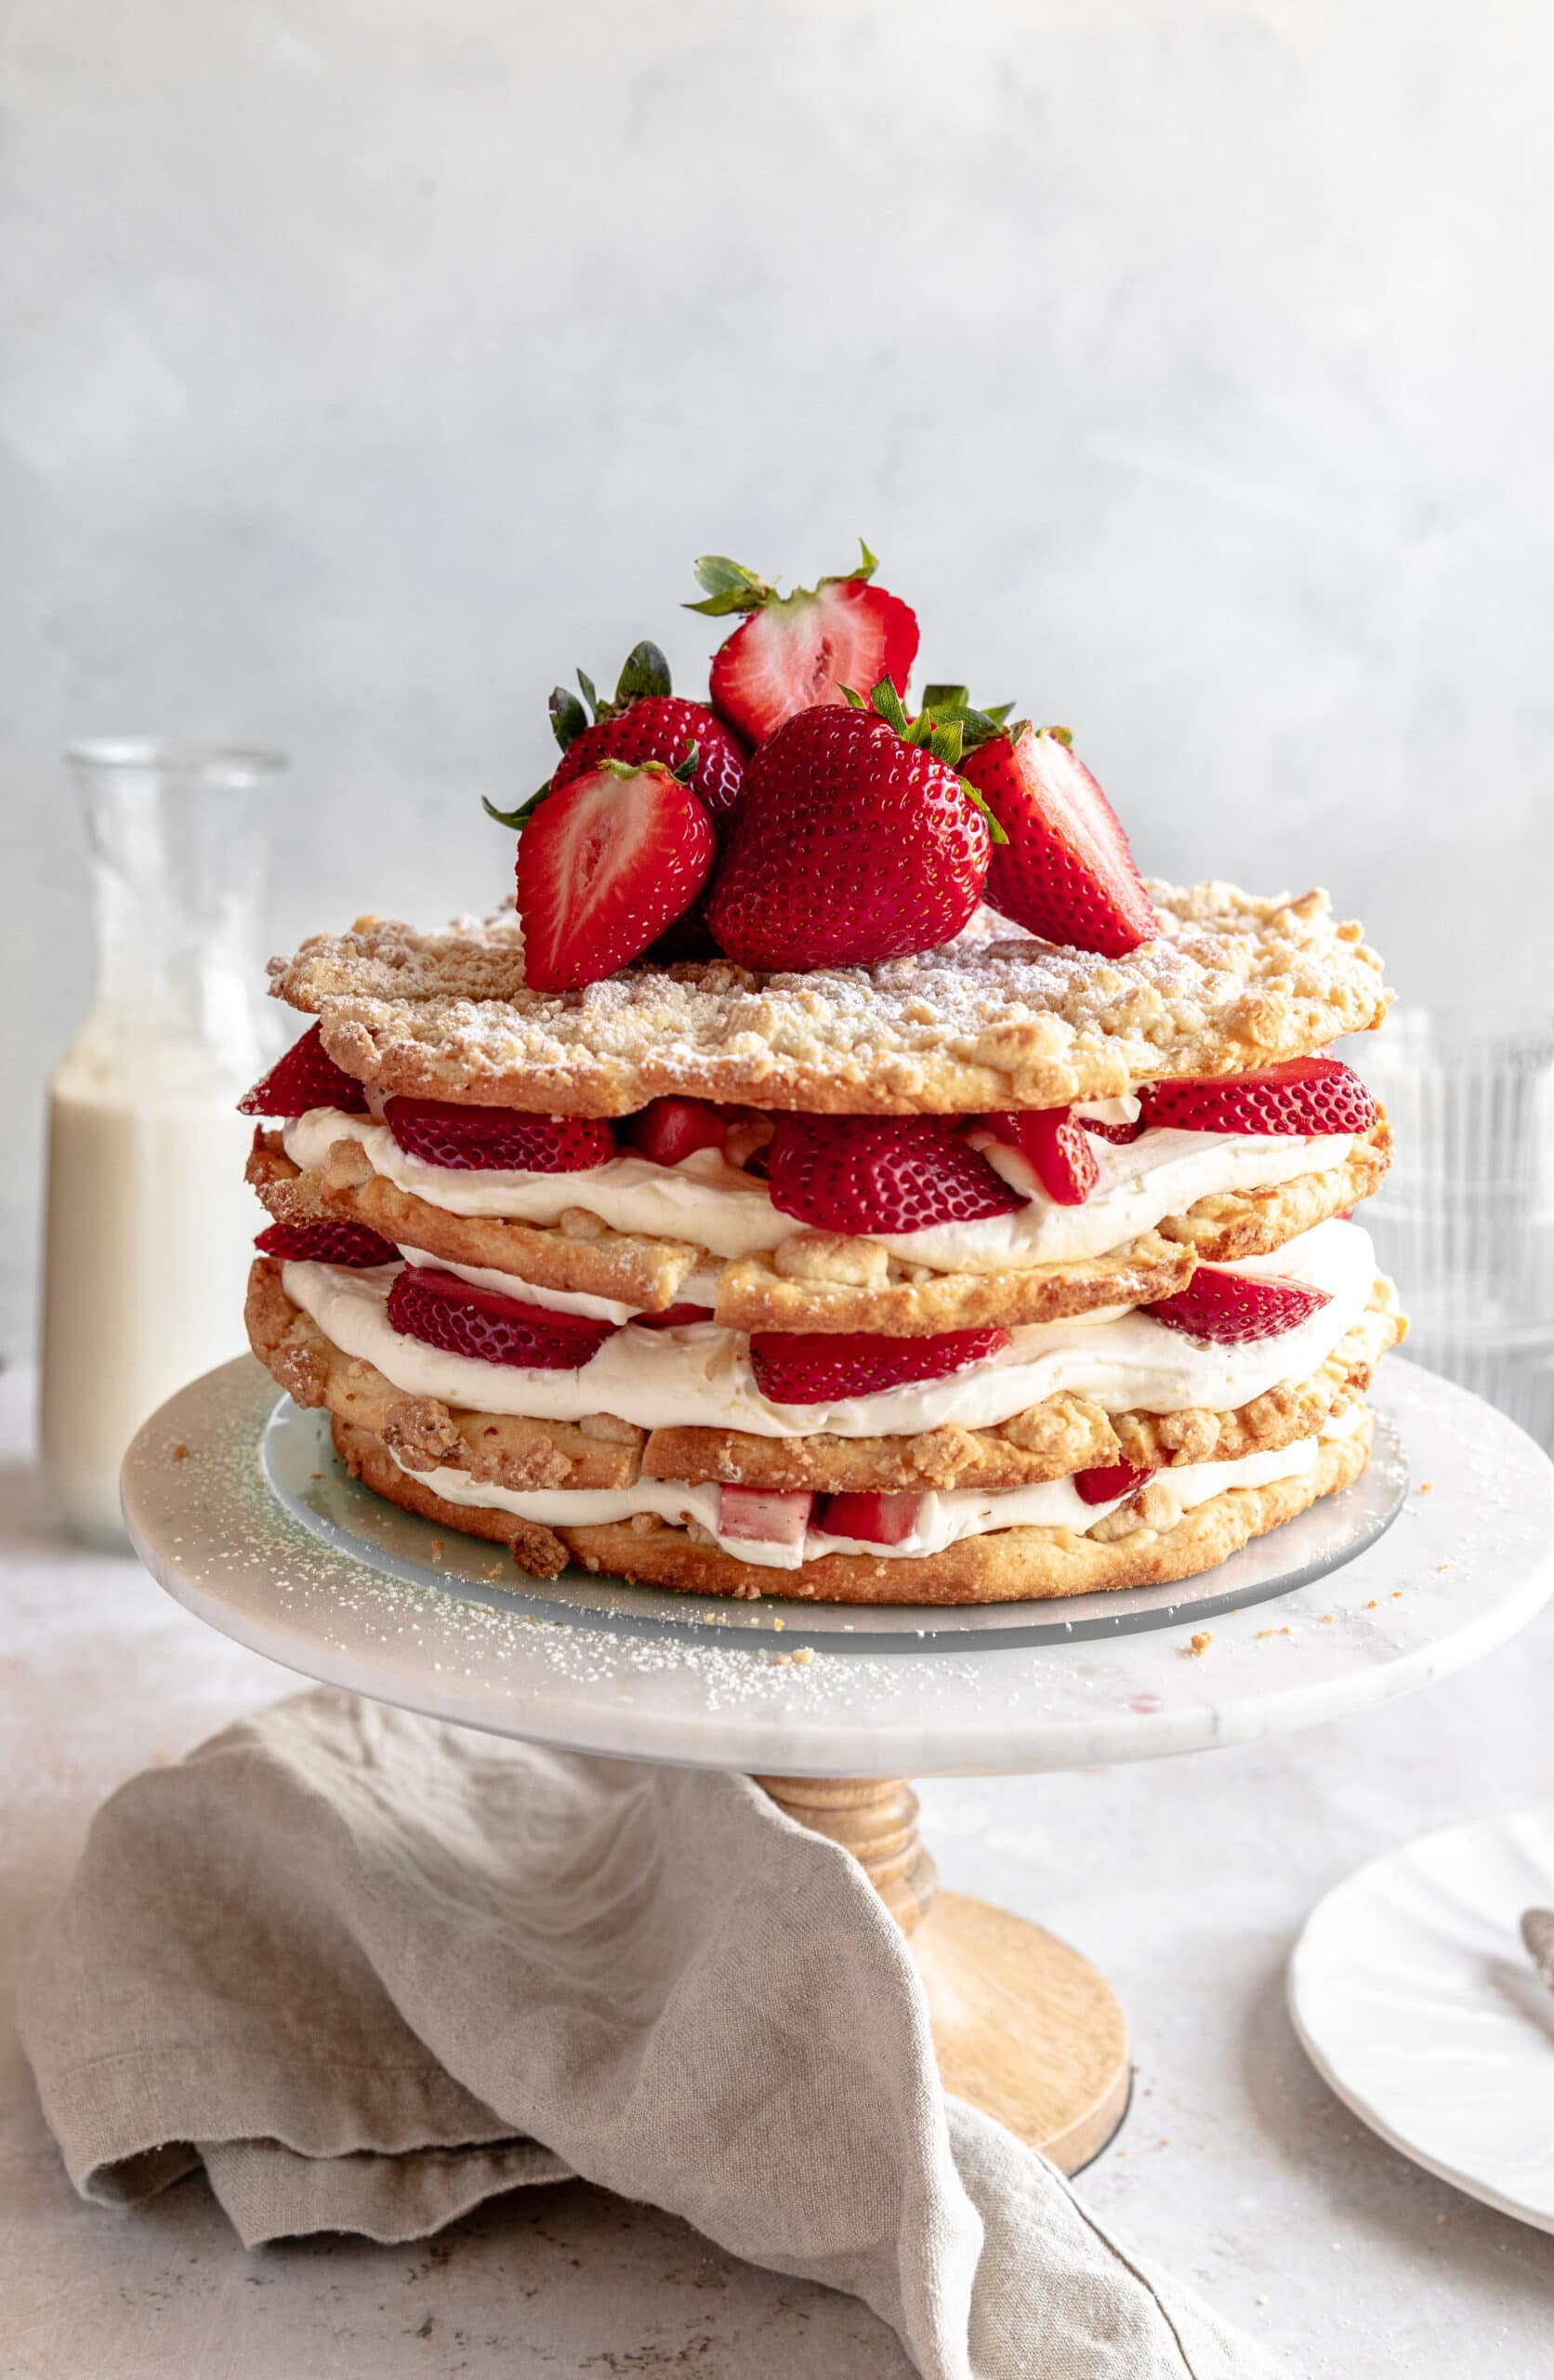 Image of a 4 tiered cake made from streusel cookie layers filled with strawberries and cream on a cake stand.